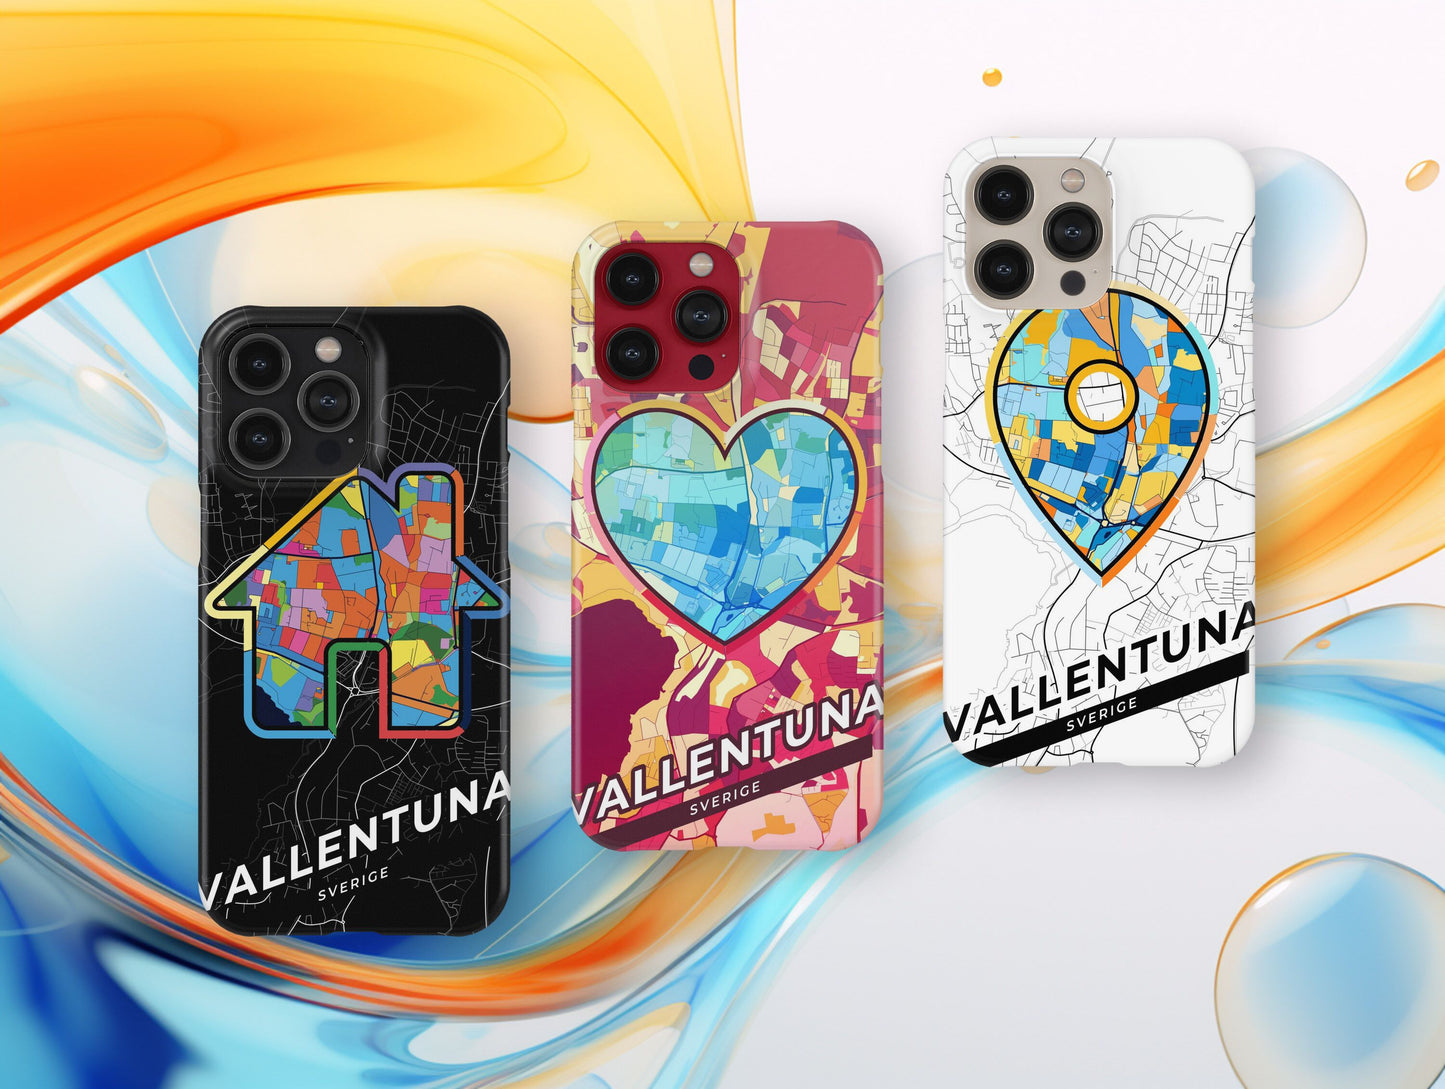 Vallentuna Sweden slim phone case with colorful icon